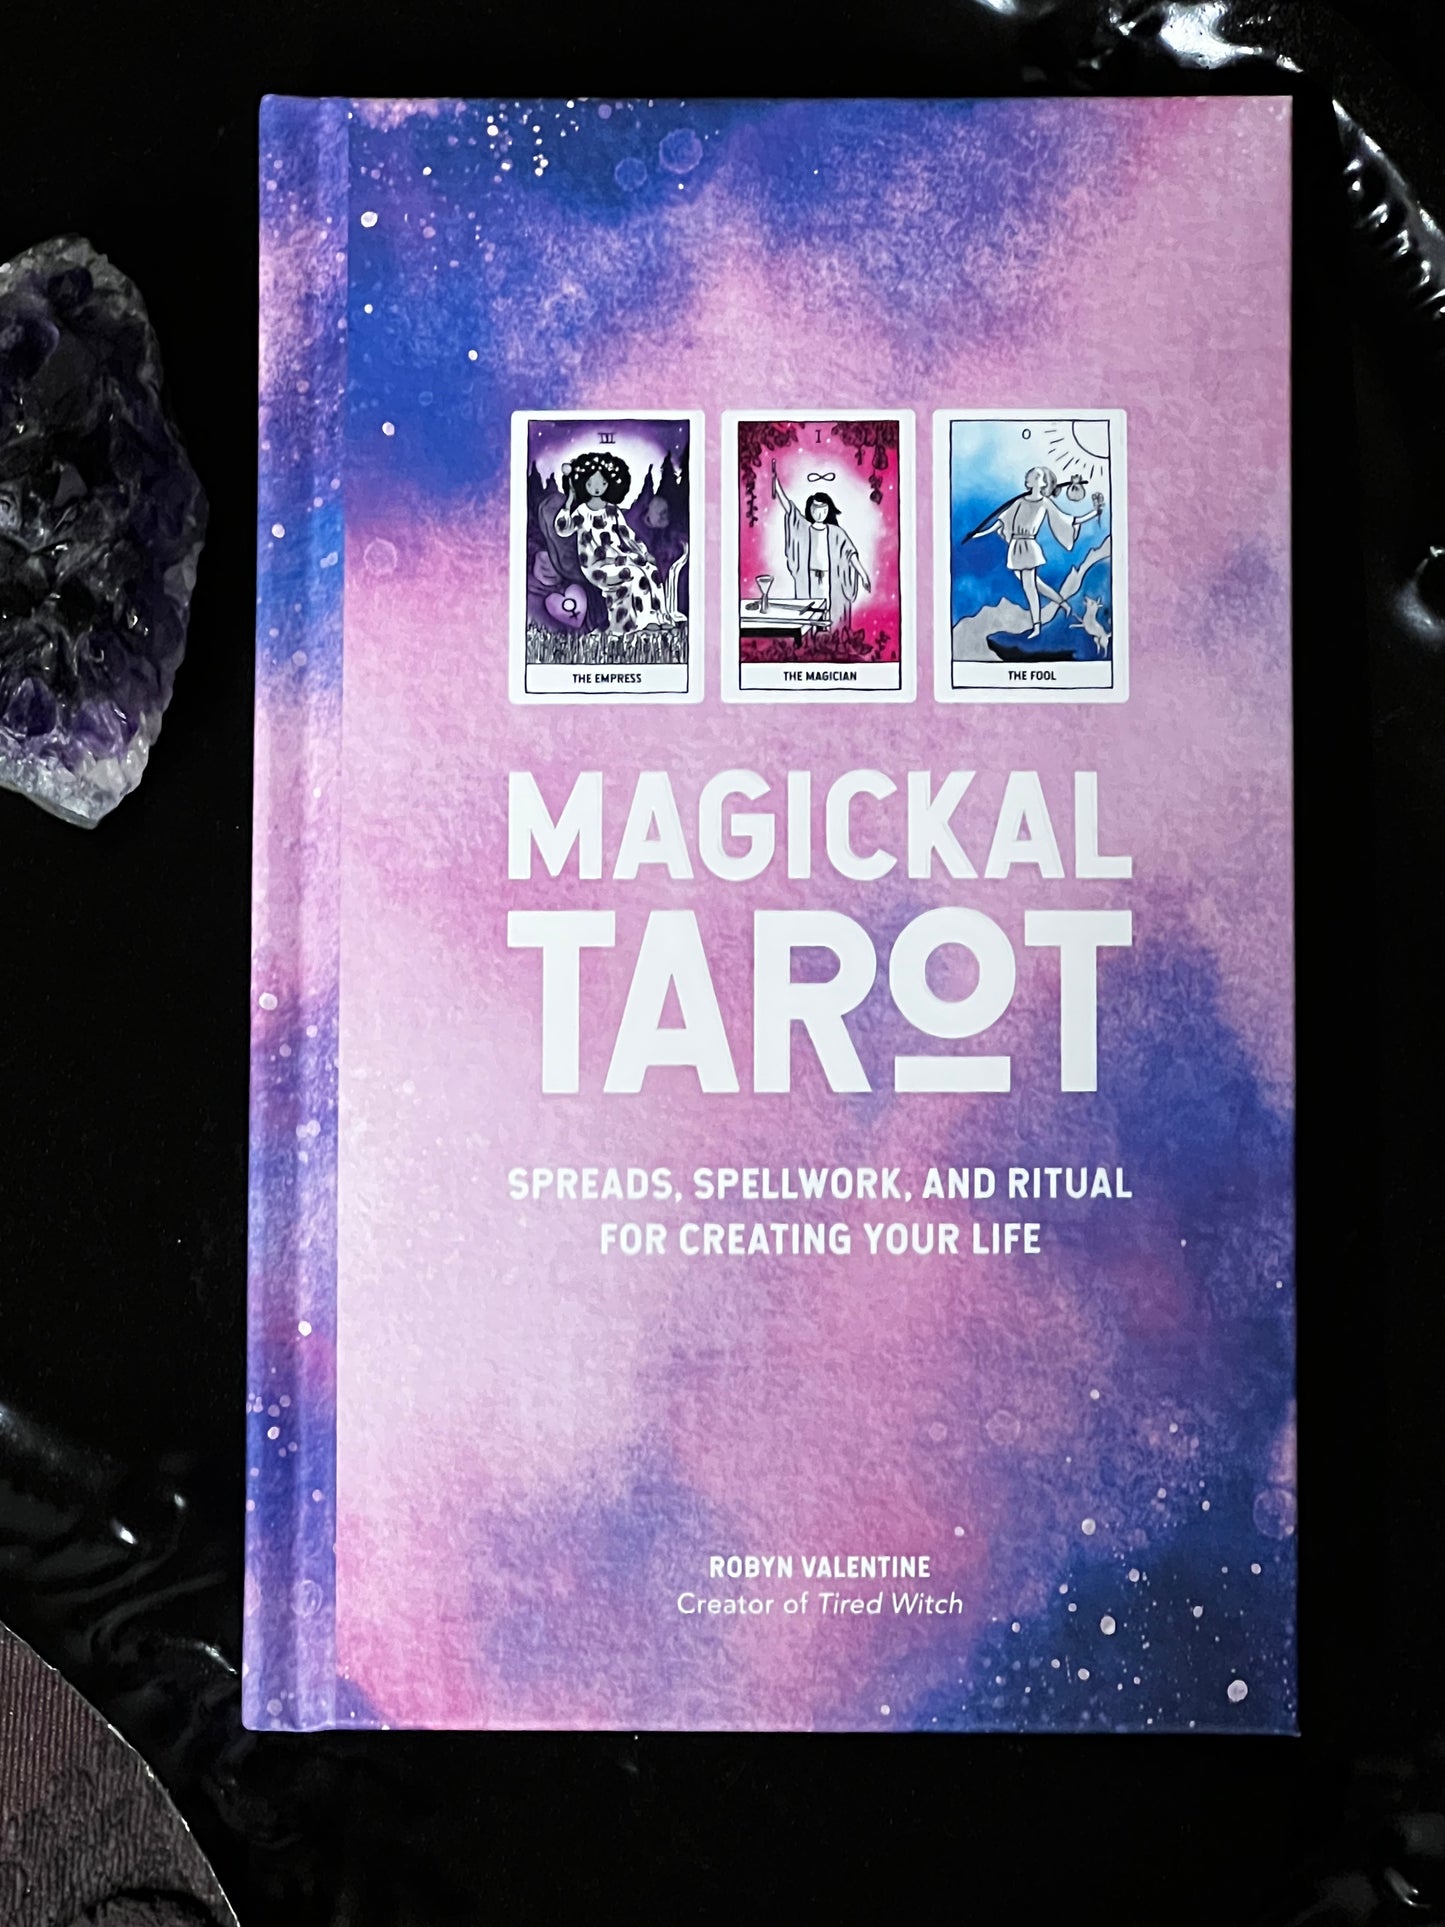 Magickal Tarot Spreads, Spellwork, and Ritual for Creating Your Life Robyn Valentine